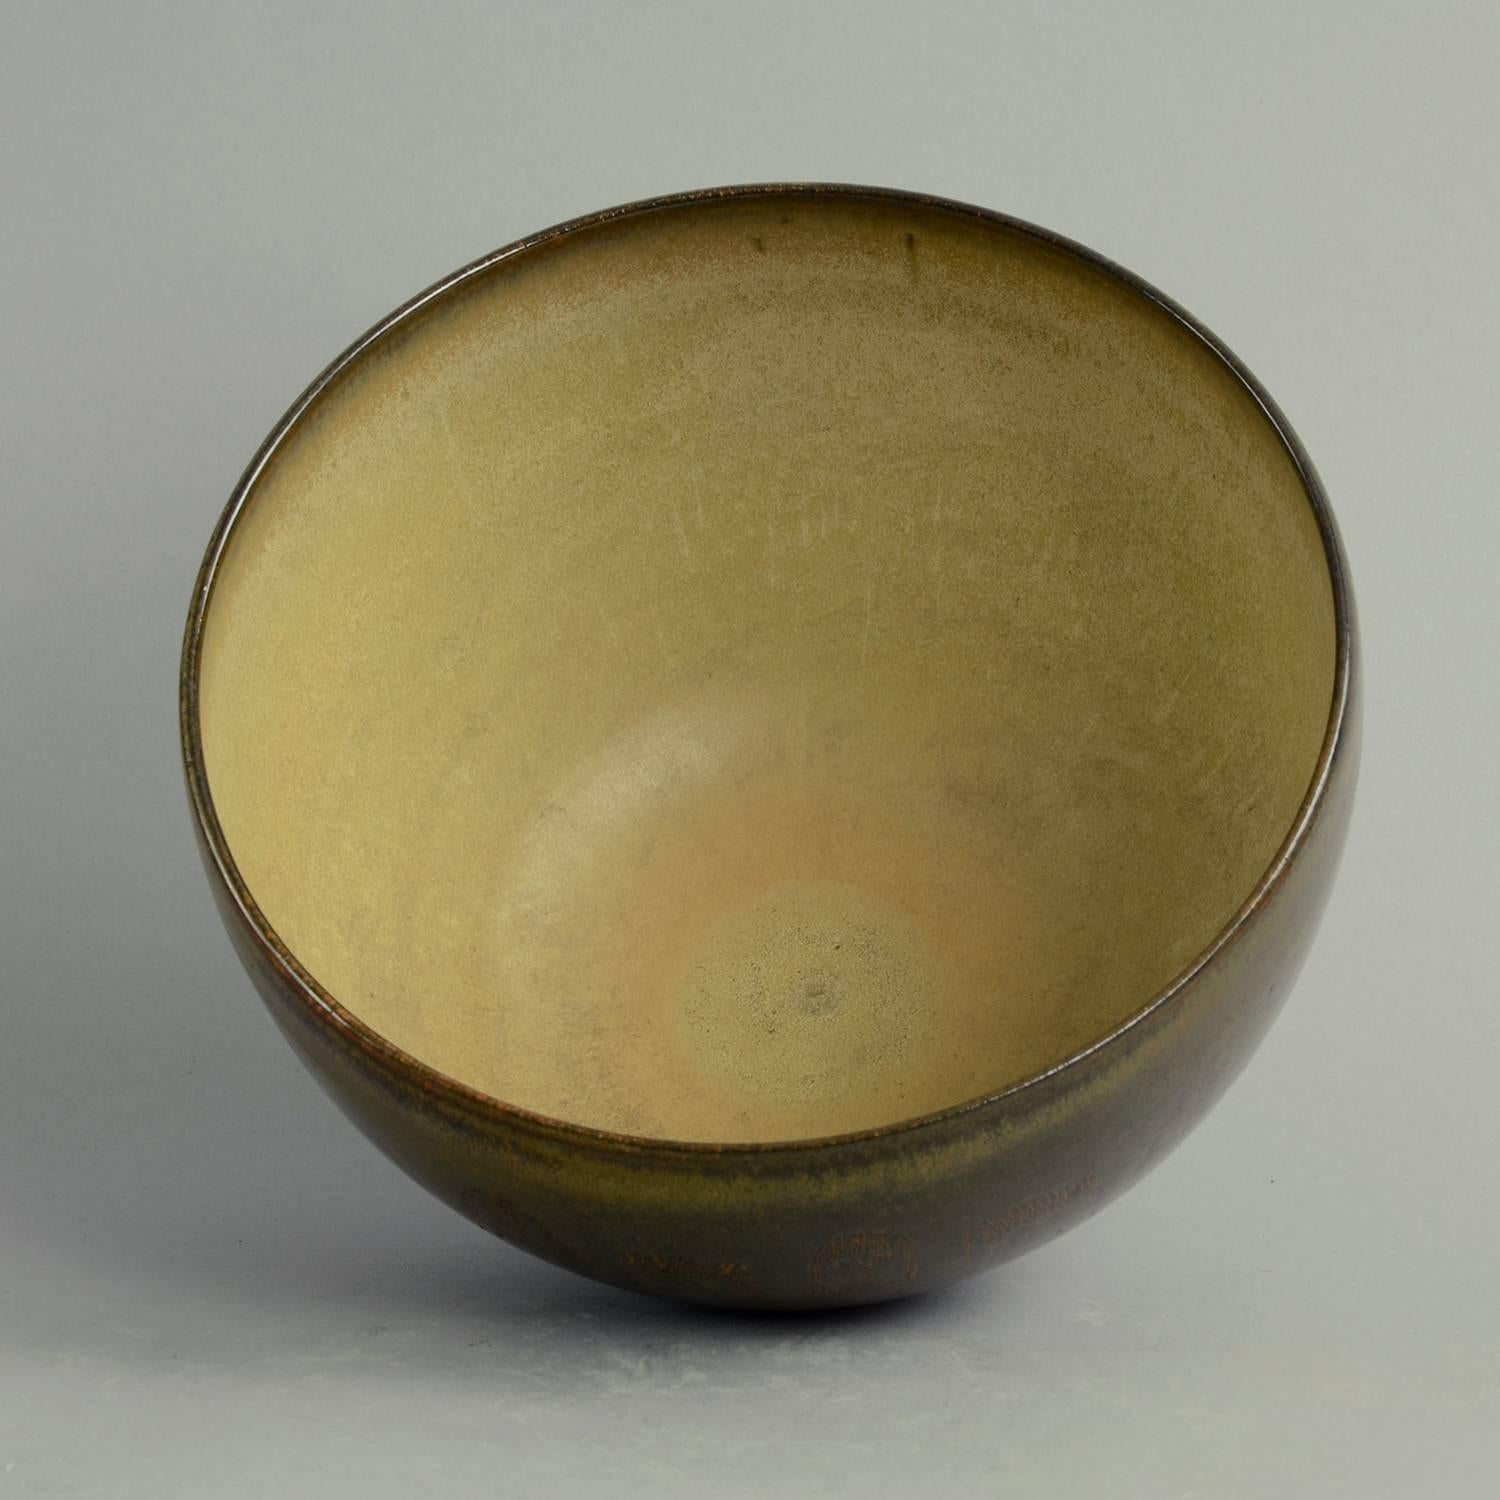 Edwin and Mary Scheier, own studio, US 

Unique stoneware bowl with incised illustration of figures and dark brown and purple glossy glaze to exterior, pale brown matte glaze to interior.
Previously from the Piras collection, Italy.
Measure: